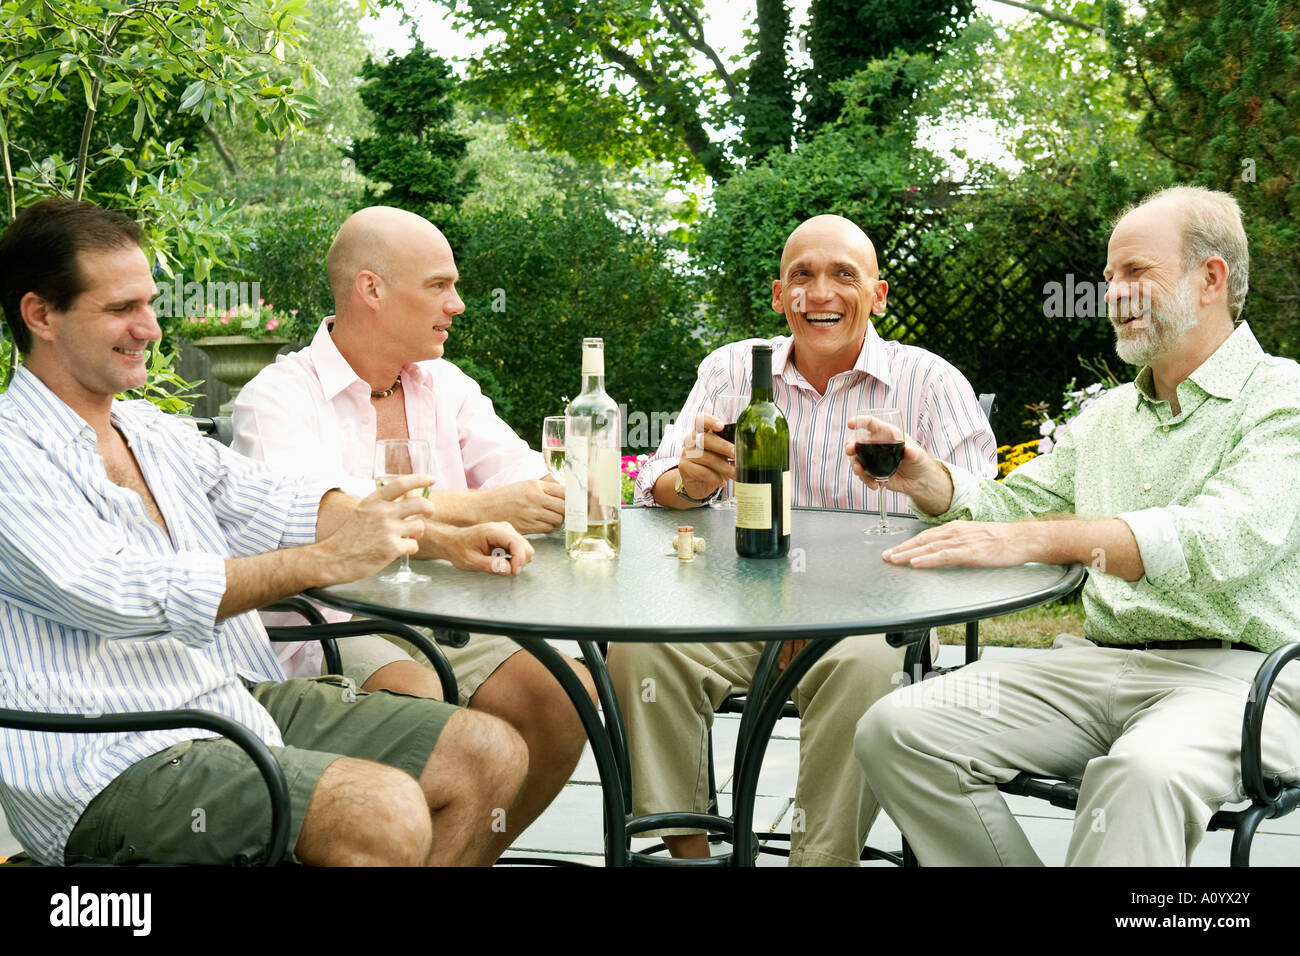 Two gay couples drinking wine together Stock Photo